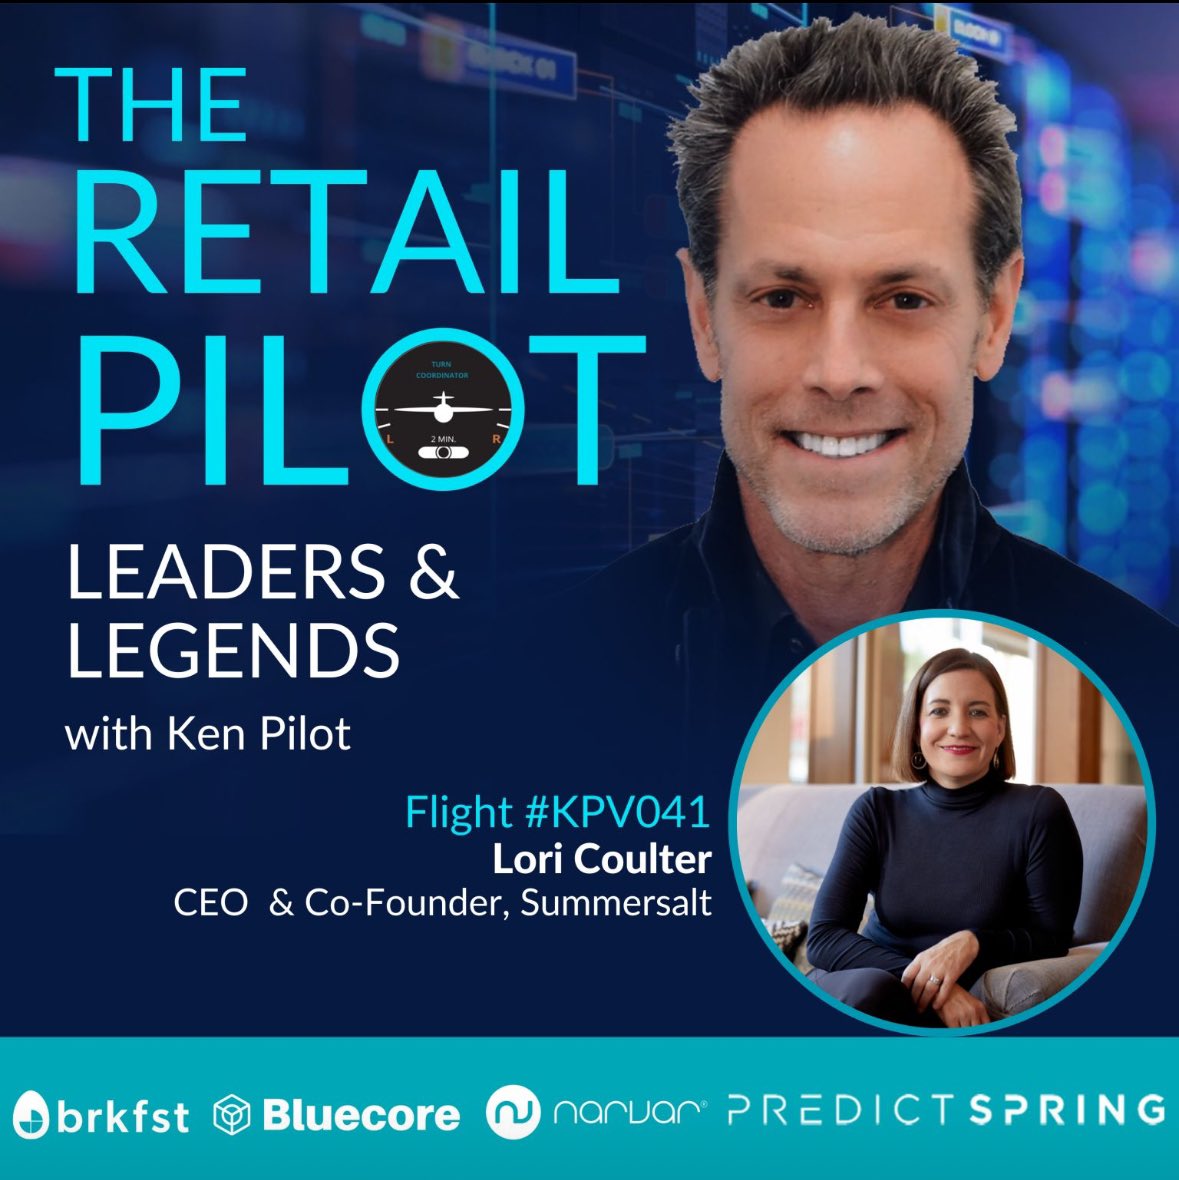 Had a great time catching up with Ken Pilot on the podcast, The Retail Pilot - Leaders and Legends. Ken has a knack for tracking emerging trends and communicating insights and opportunities. Grateful for the opportunity to highlight @summersalt! redcircle.com/shows/64611c4d…